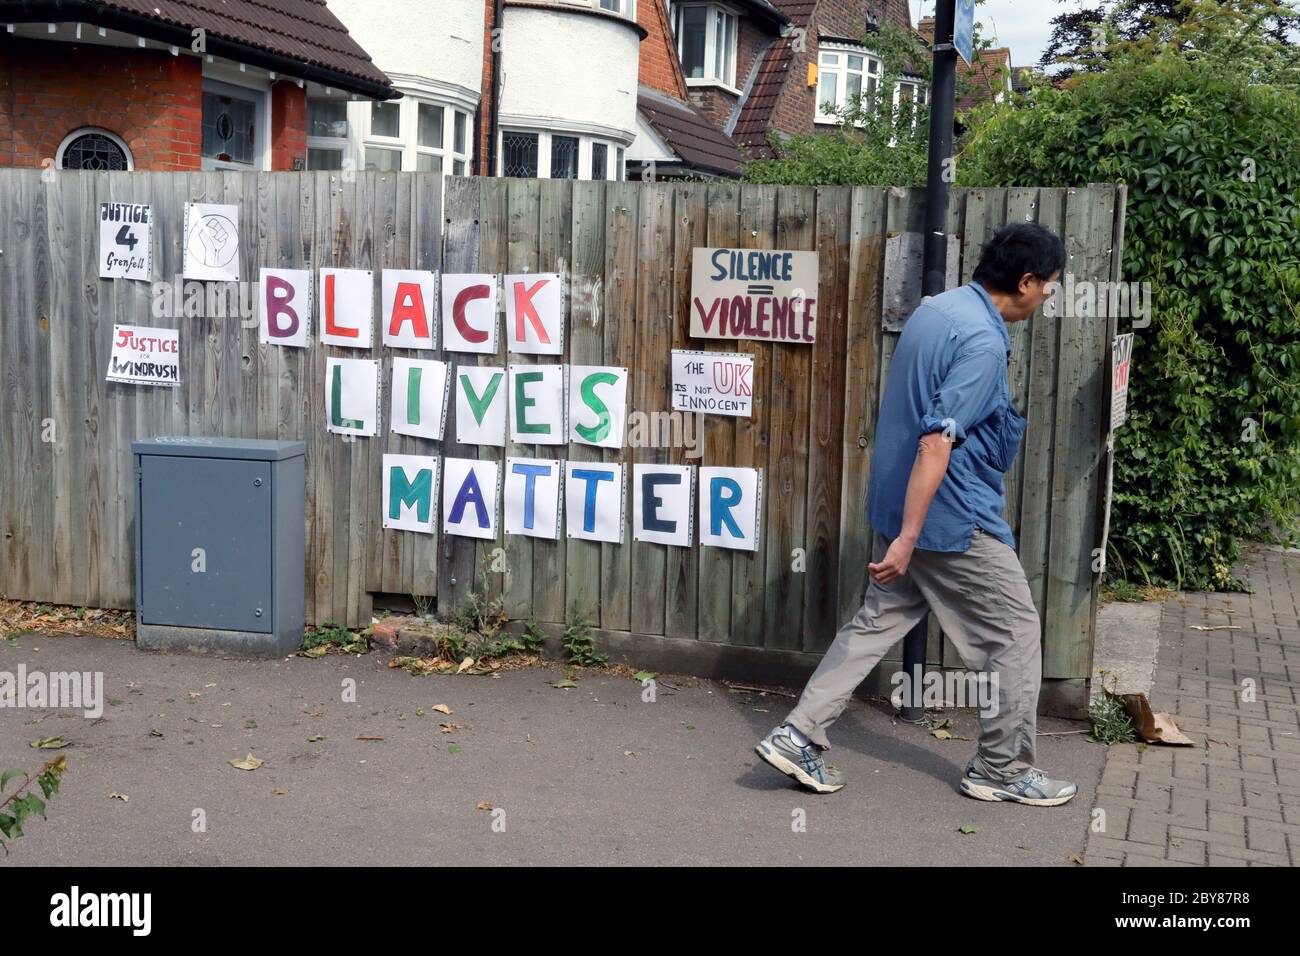 London / UK – June 7, 2020: a man walks past signs for the Black Lives Matter movement in Crouch End, north London Stock Photo